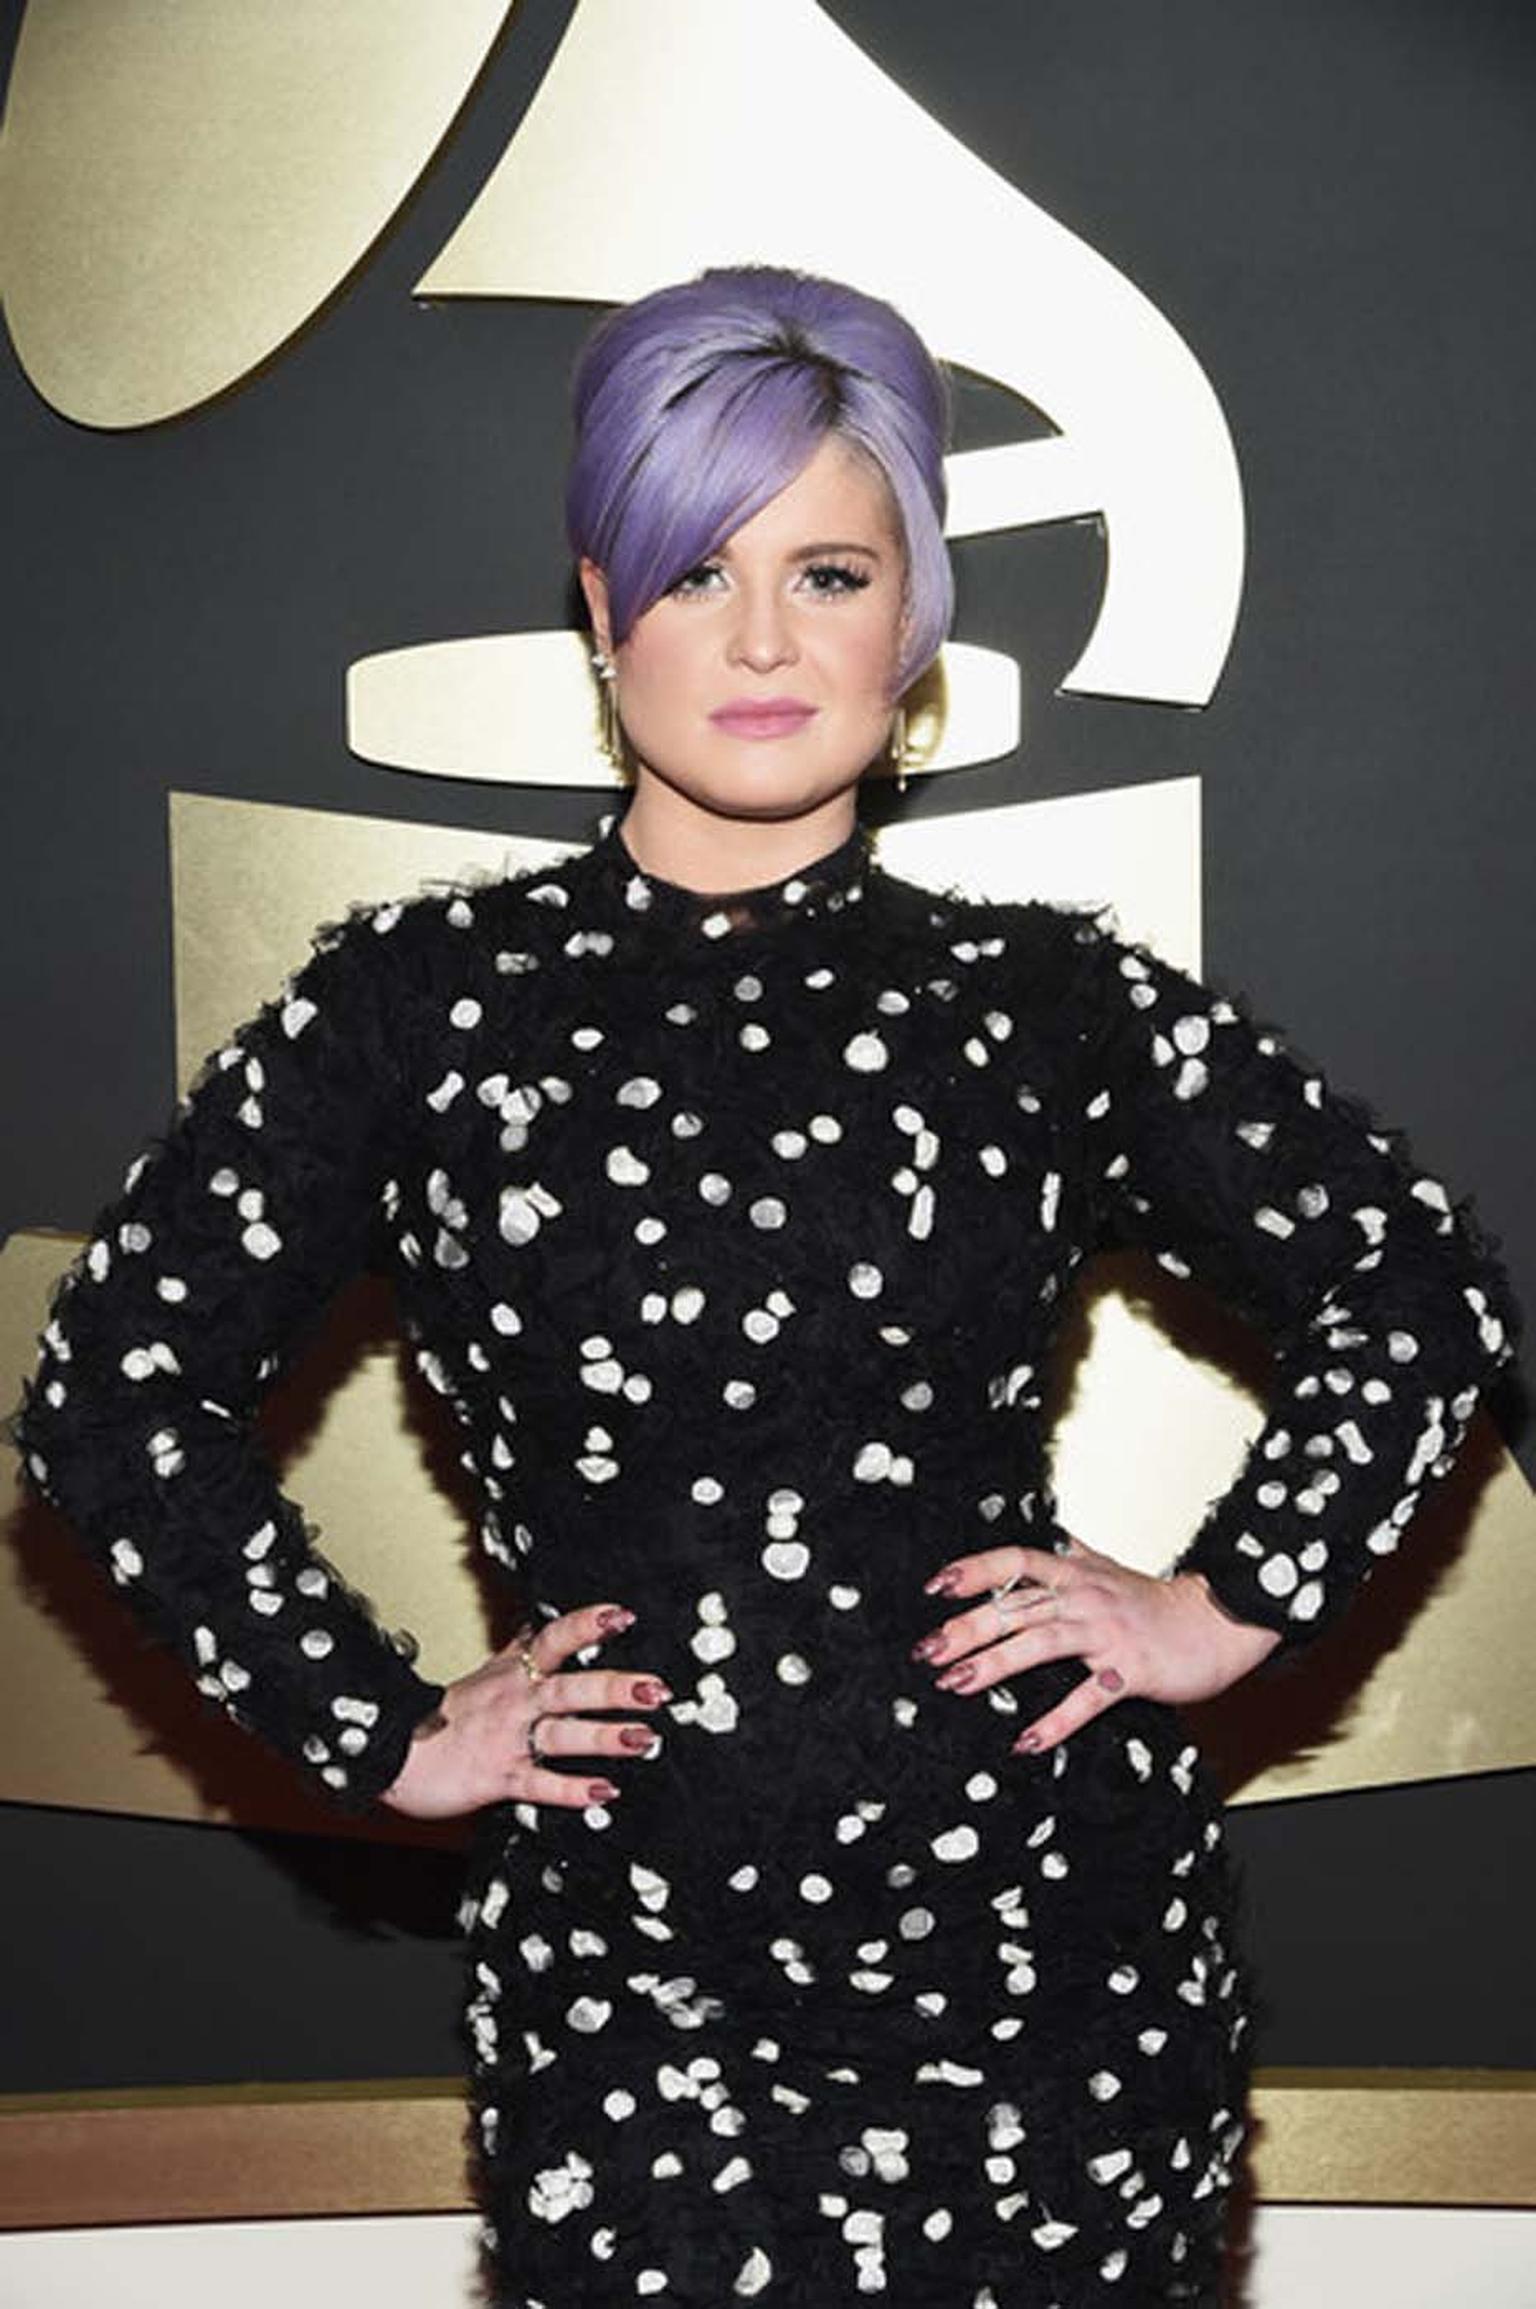 Kelly Osbourne opted for Borgioni diamond earrings and Borgioni diamond rings on the red carpet at the 57th Annual Grammy Awards in Los Angeles.